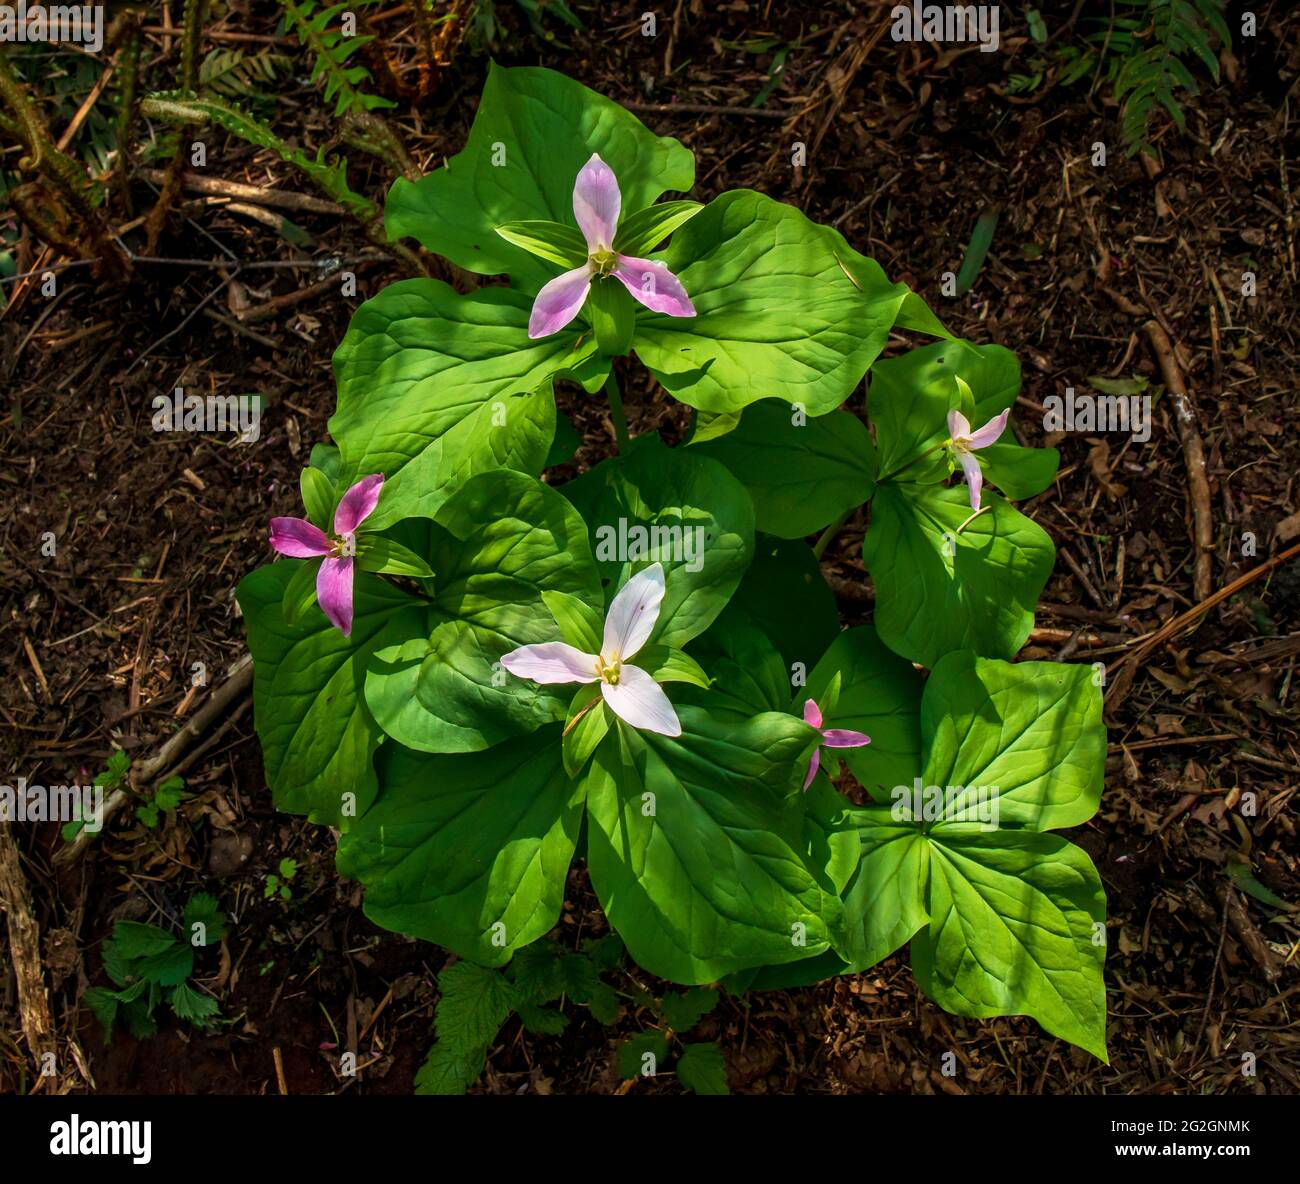 Trillium (Trillium ovatum), a wildflower that grows in southern British Columbia and island's temperate rain forests, in shady, moist locations. Stock Photo